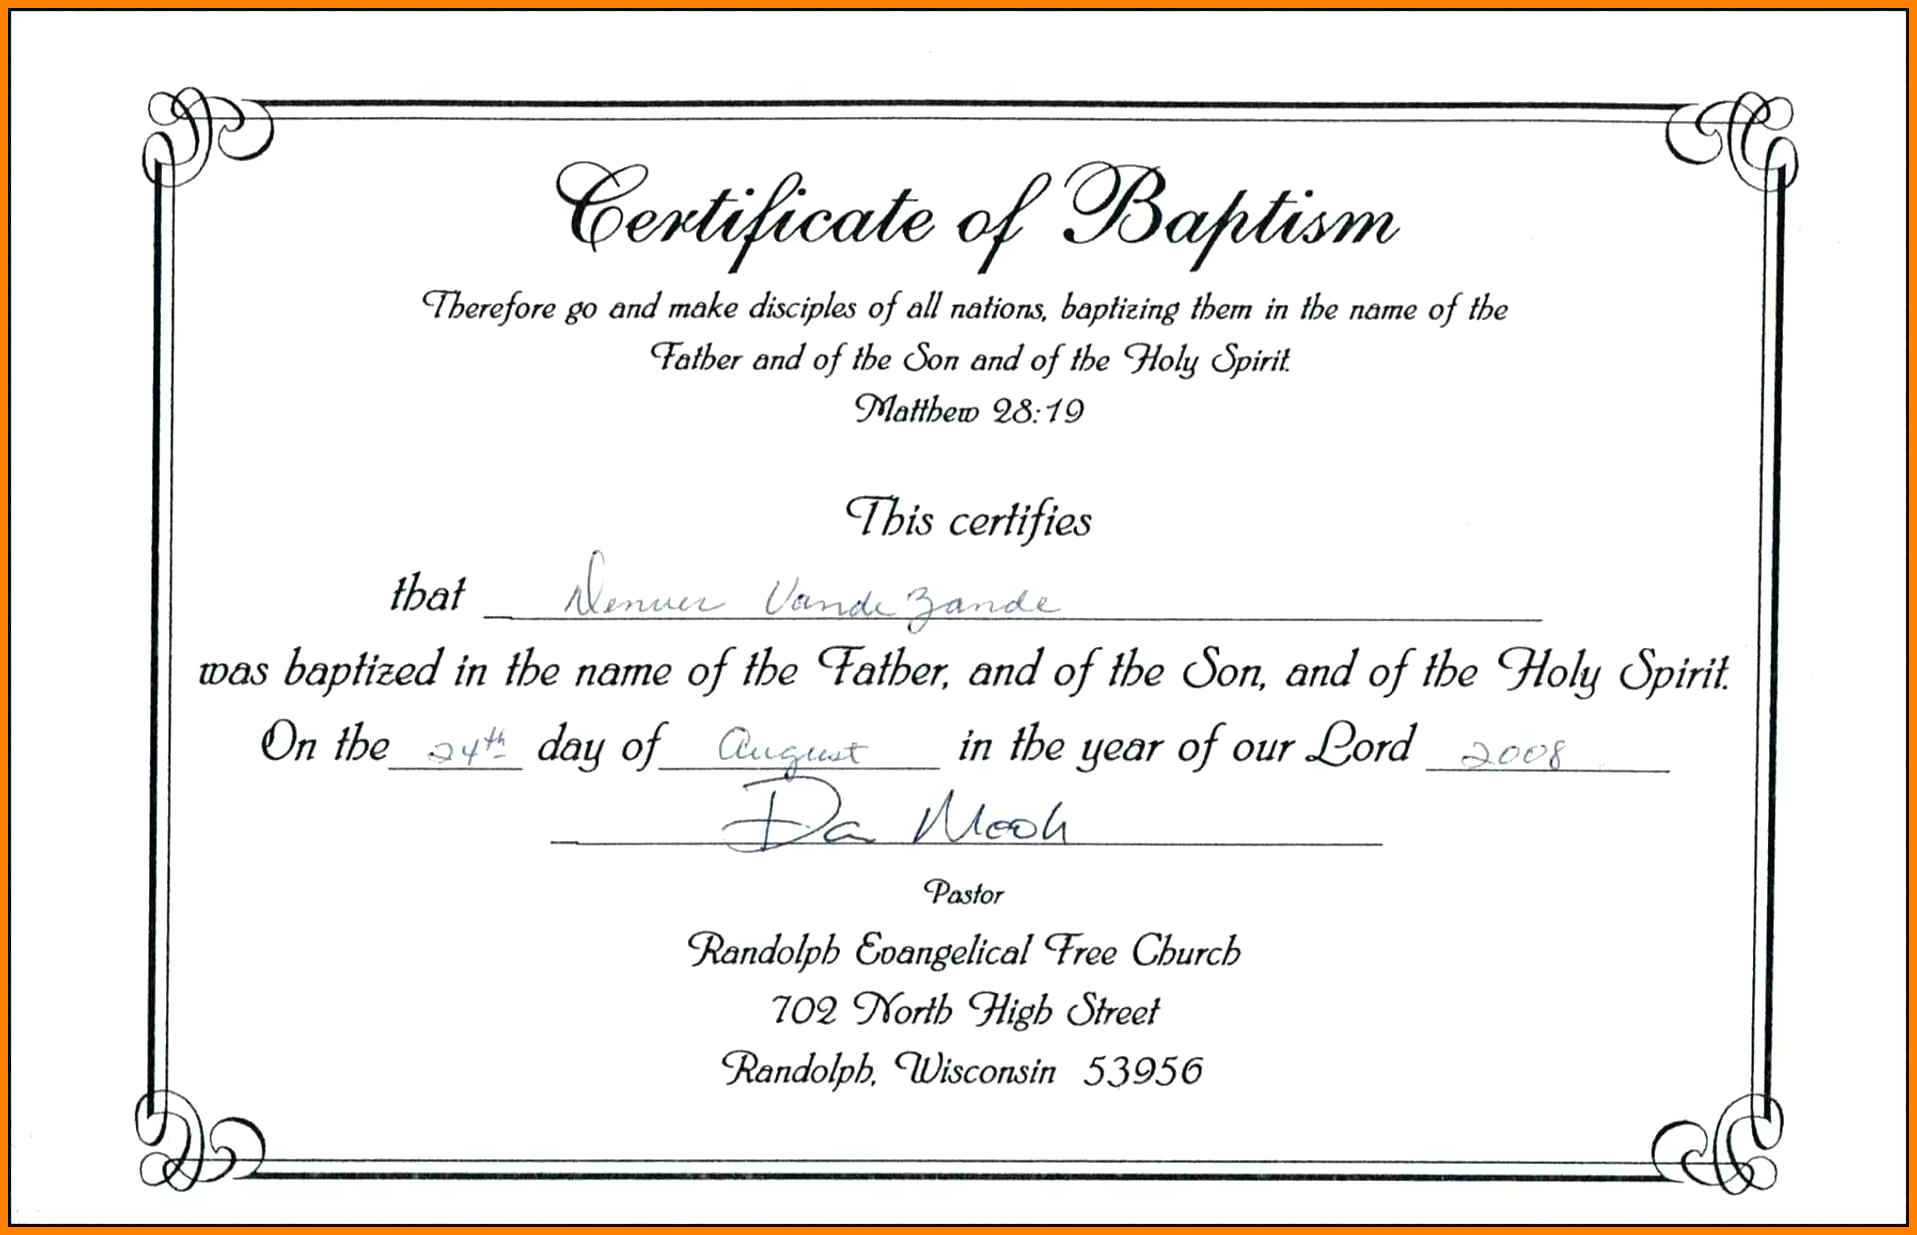 003 Certificate Of Baptism Template Ideas Unique Catholic Throughout Christian Certificate Template